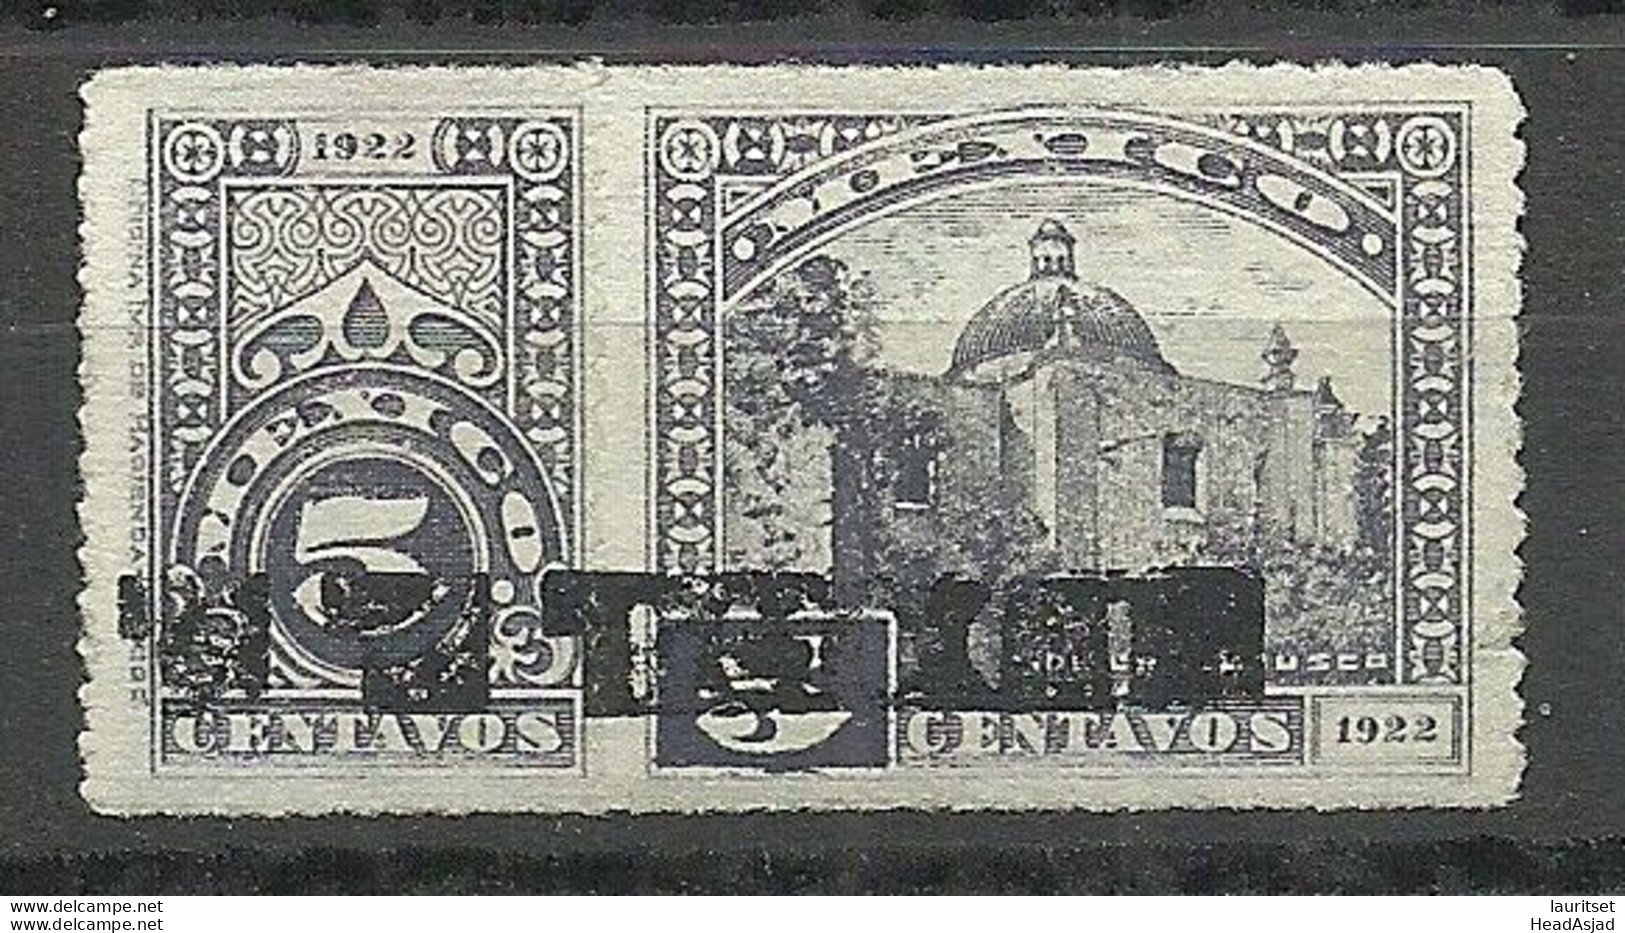 MEXICO 1922 Architecture 5 C. With OPT - Mexique